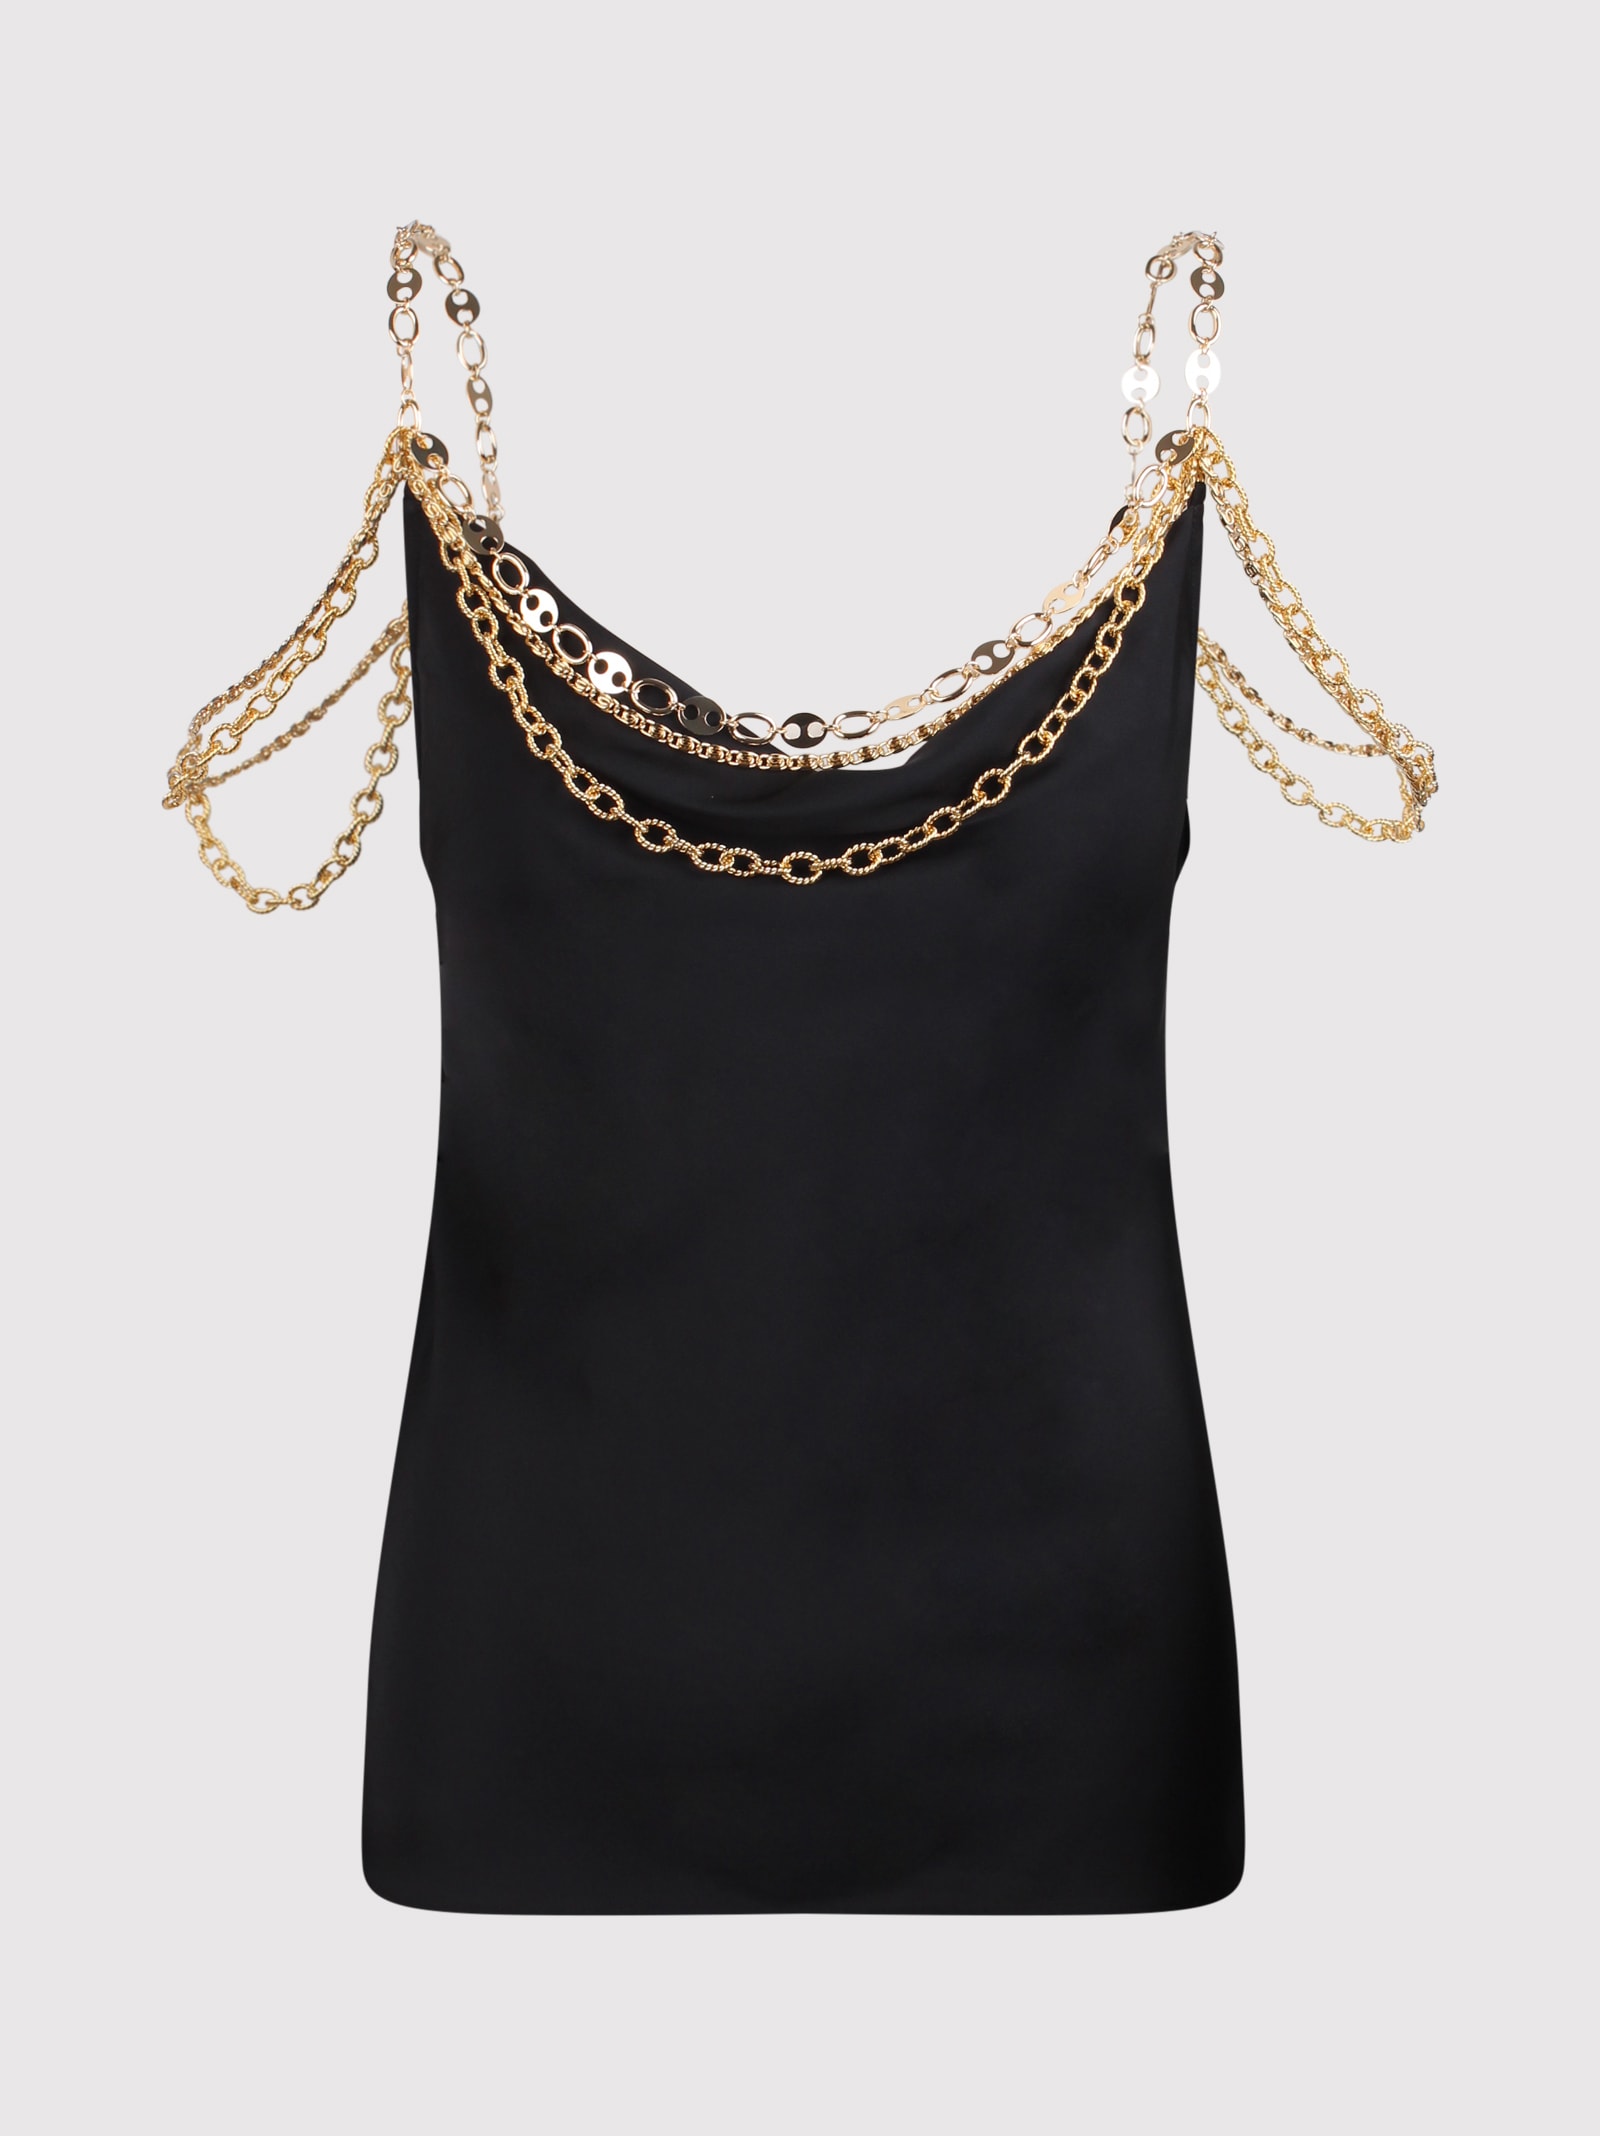 Rabanne Black Top In Gold With Mesh And Chain Details